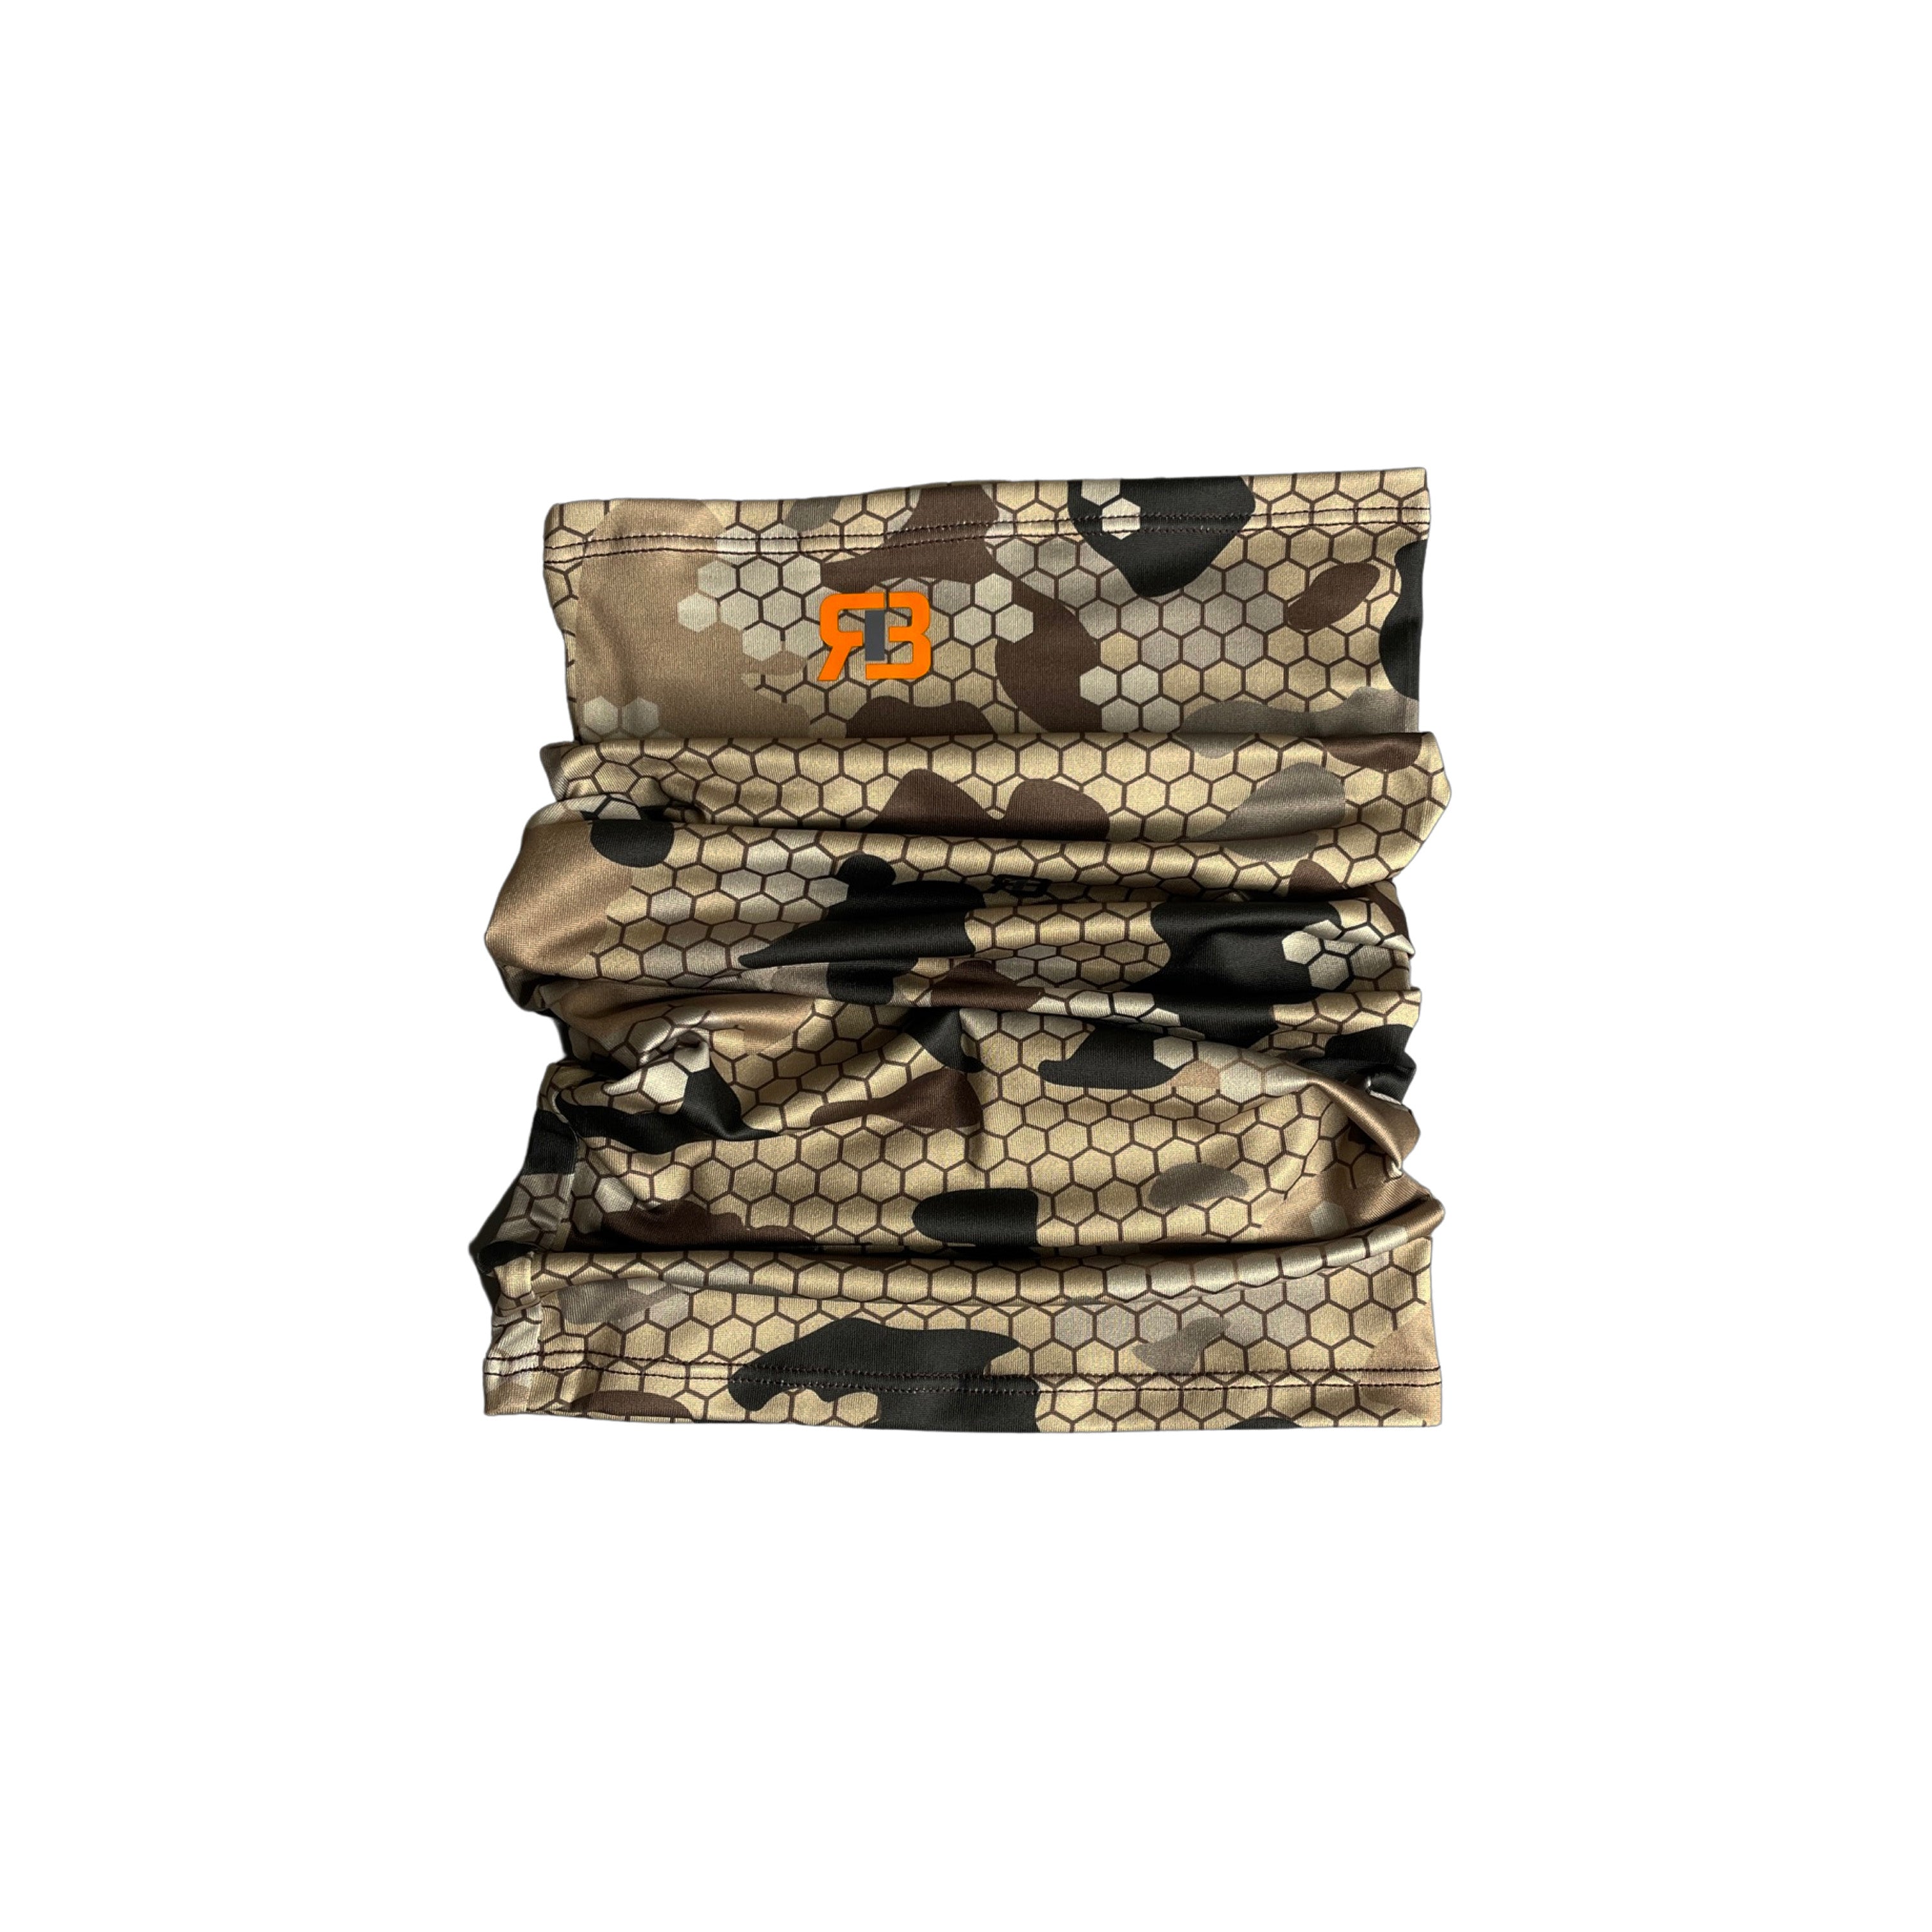 BEST] Louis Vuitton Tiger Hoodie Pants Limited Edition